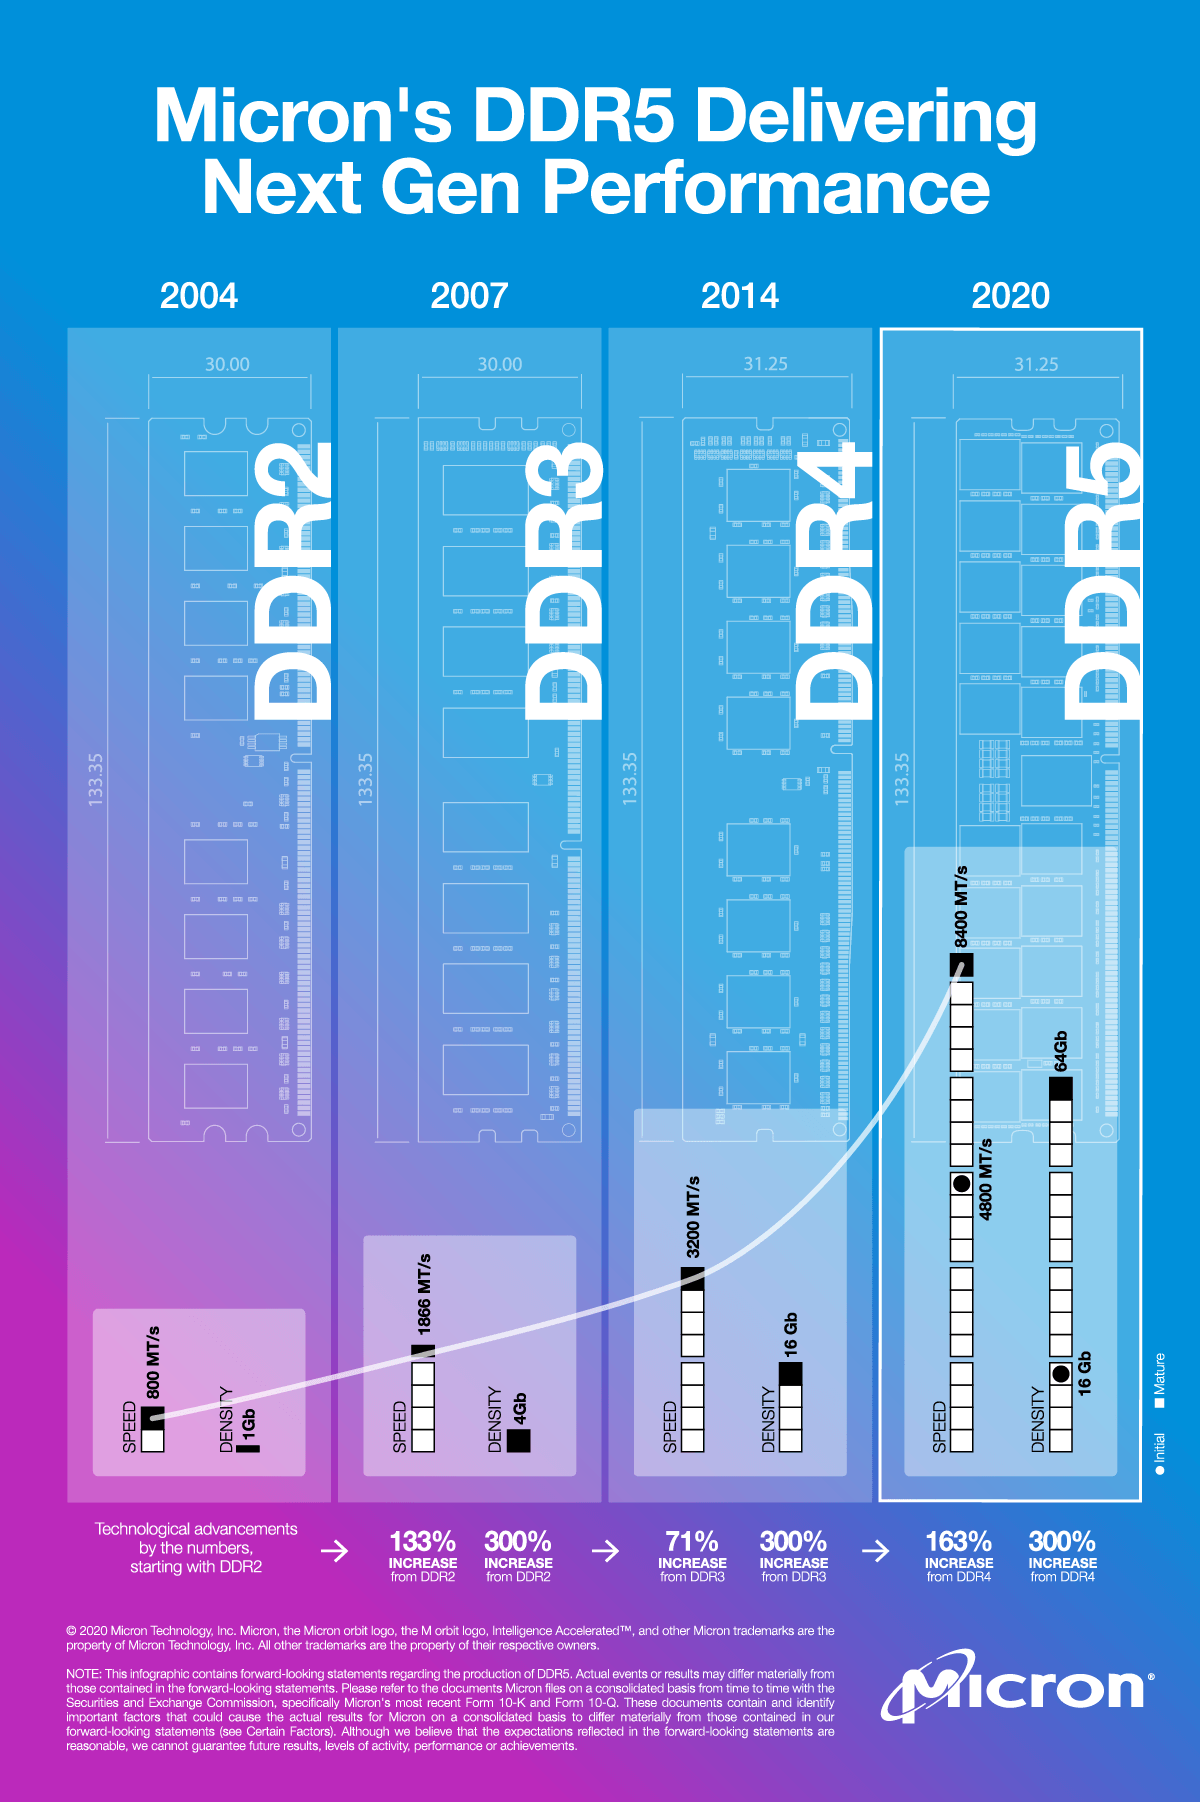 DDR5 infographic showing comparisons to DDR2, DDR3, and DDR4.